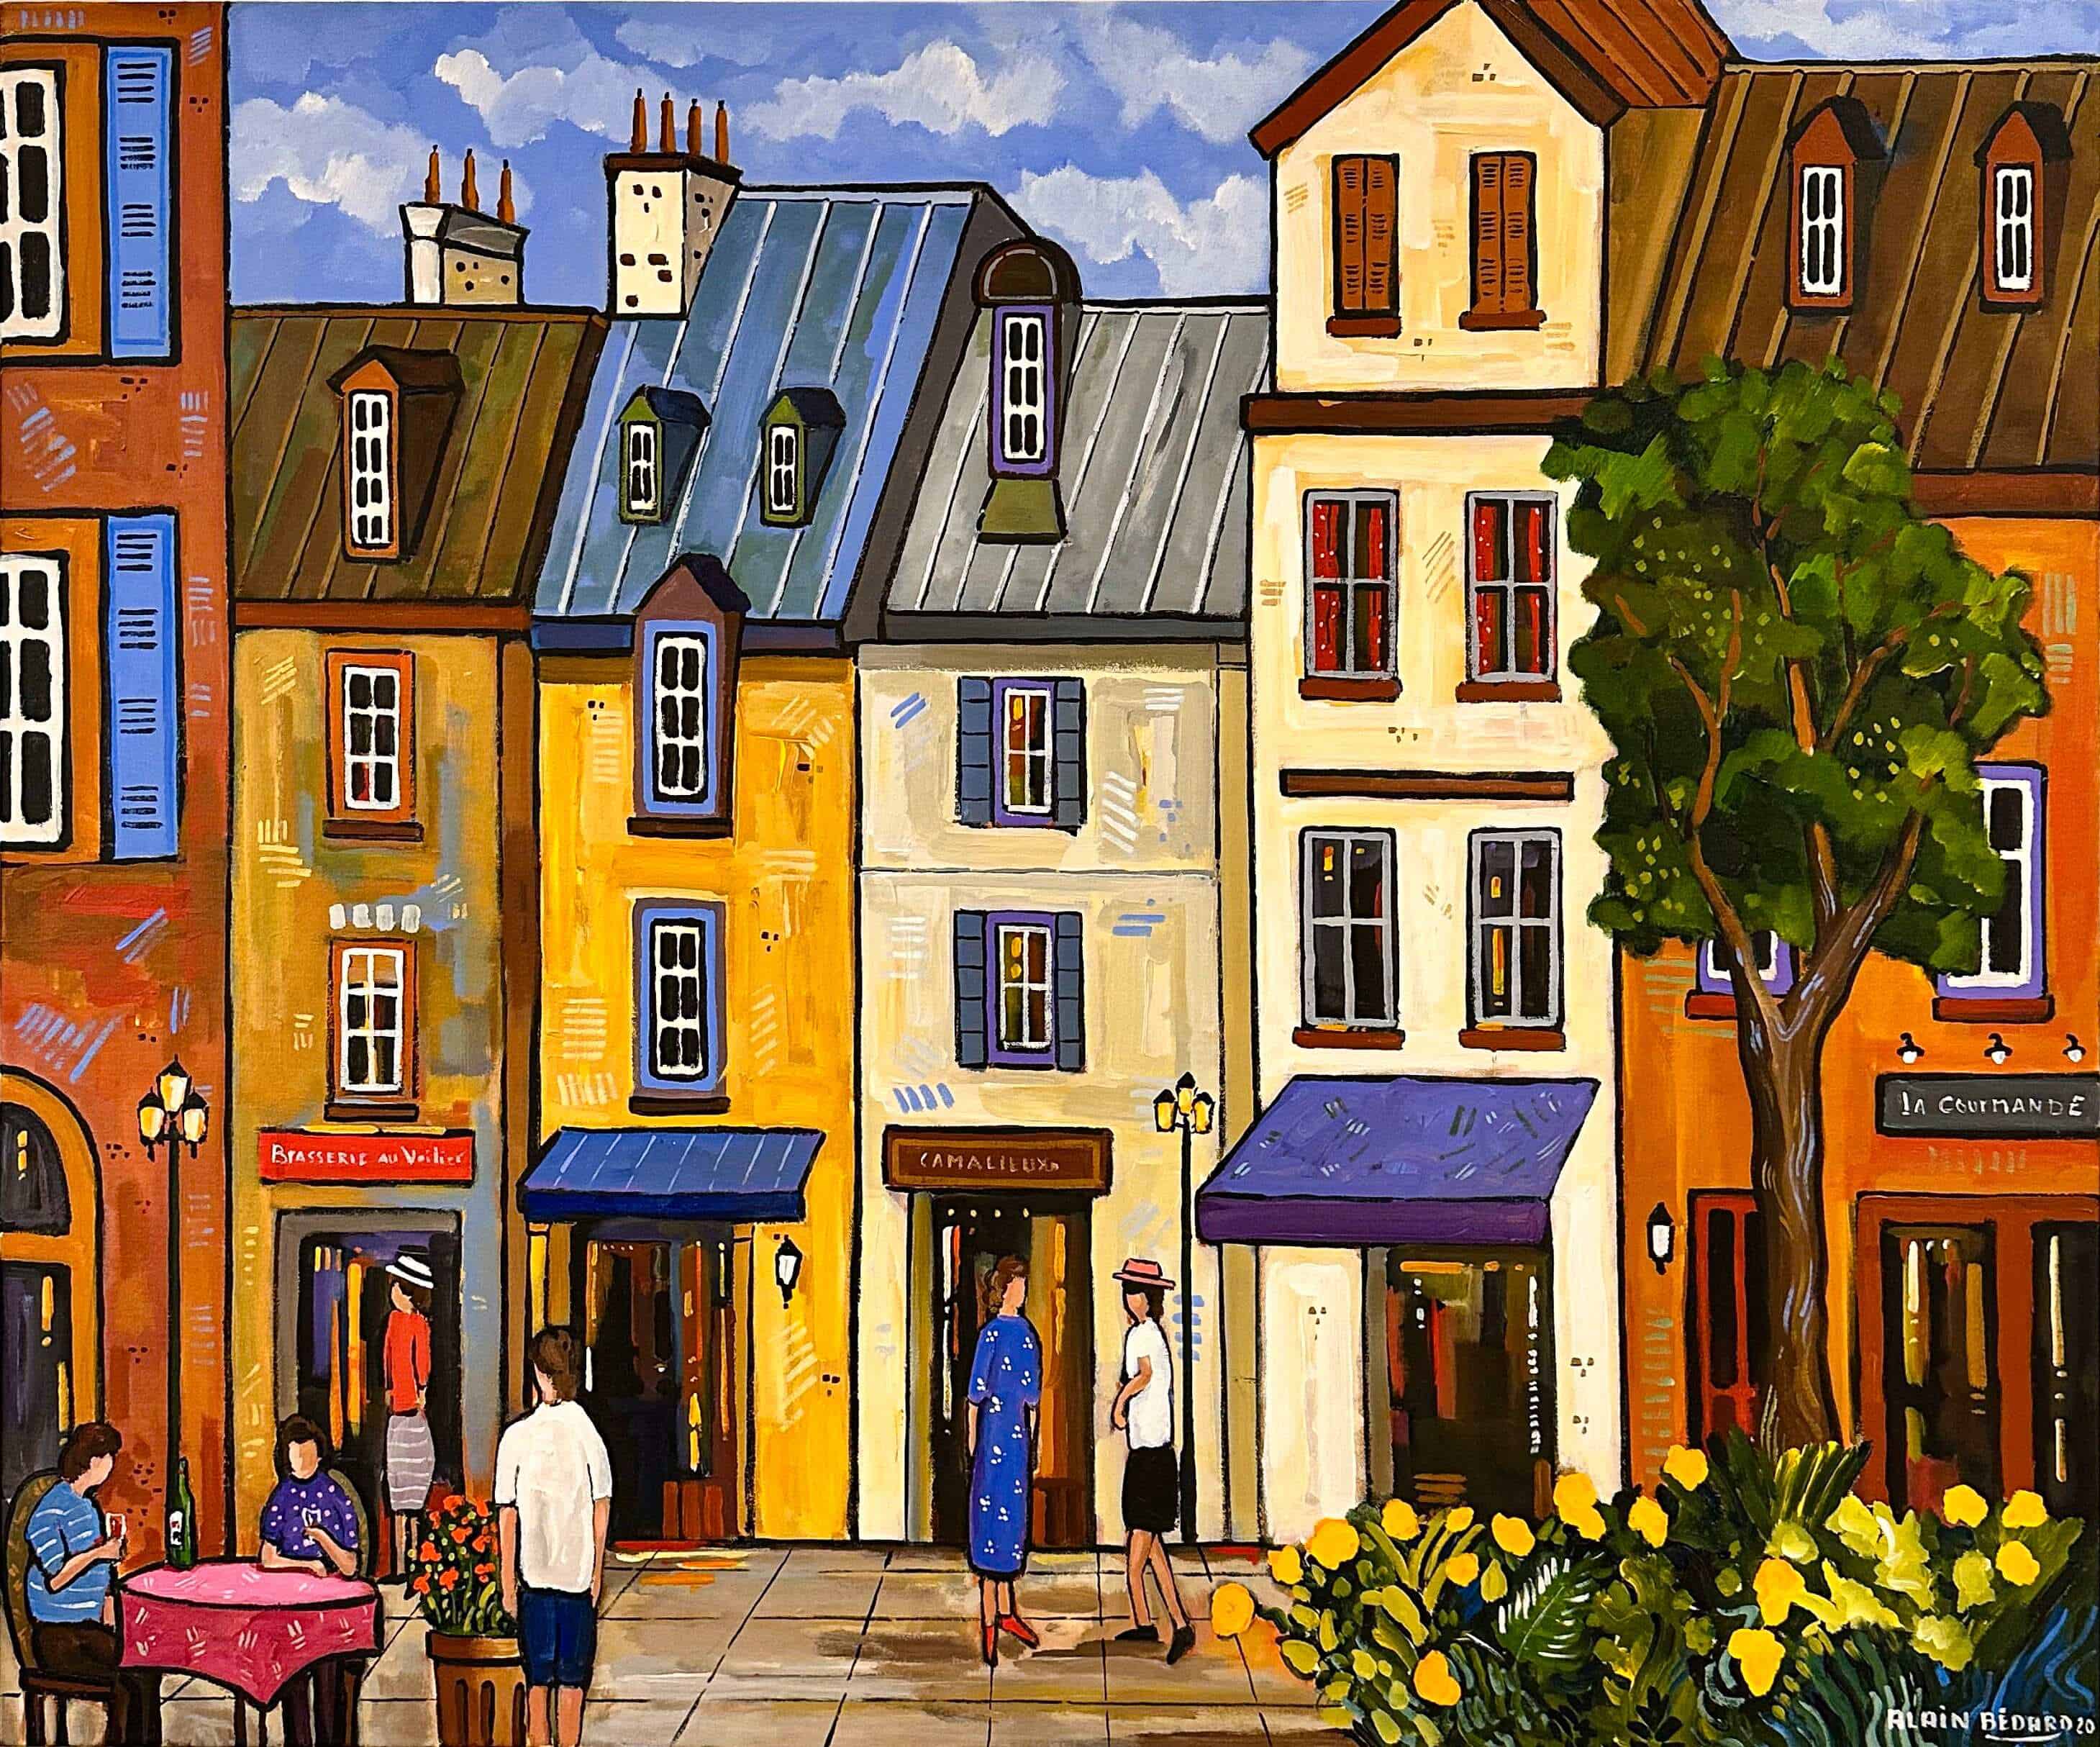 Contemporary Art. Title: Honfleur So Beautiful, Acrylic on Canvas, 30 x 36 in by Canadian Artist Alain Bédard.